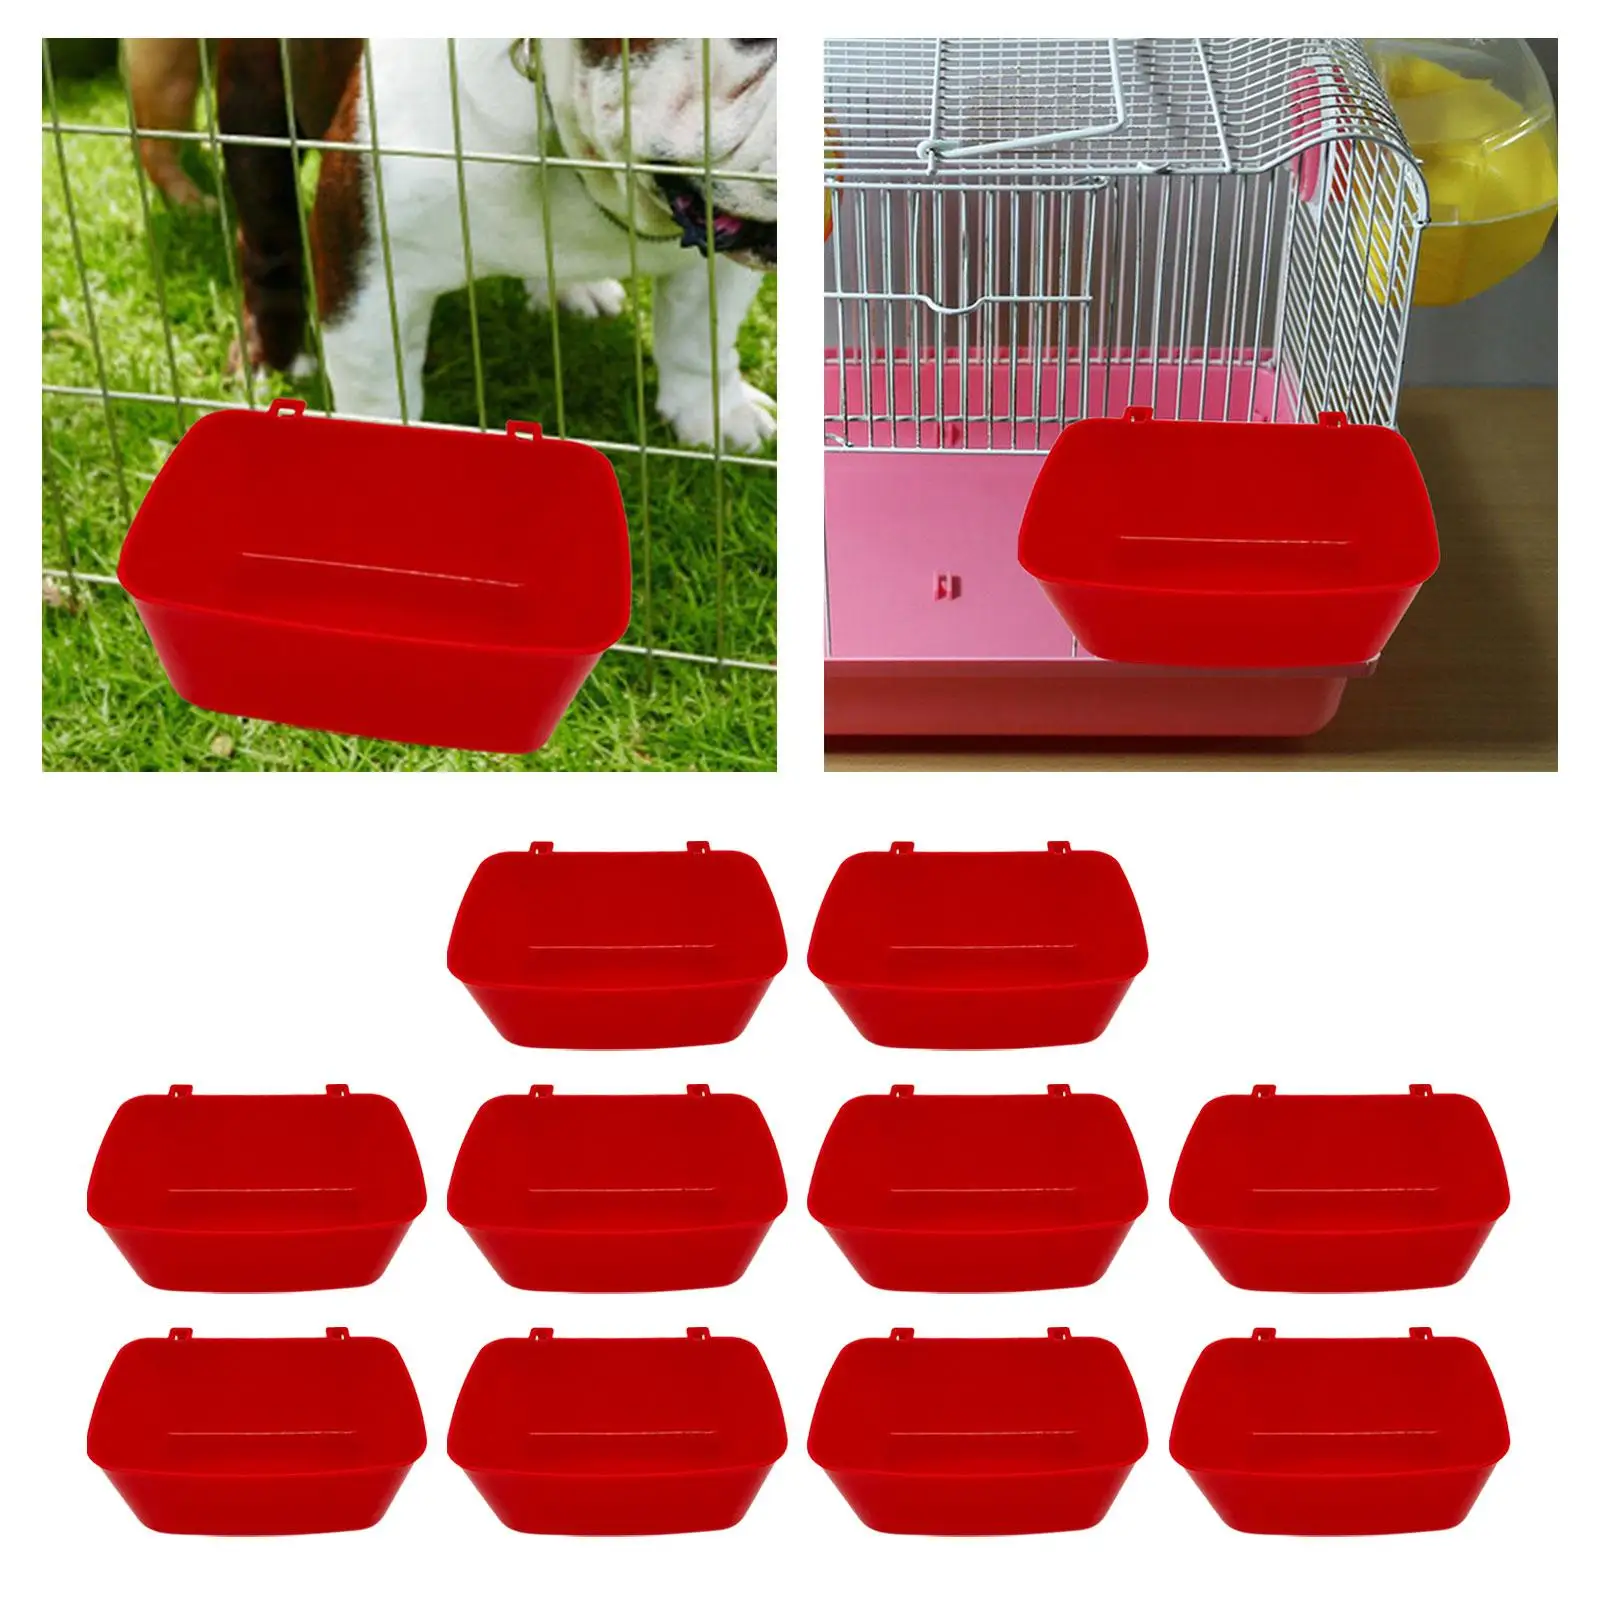 10Pcs Cat Water Bowl Watering Container Waterer for Poultry Kitten Budgies